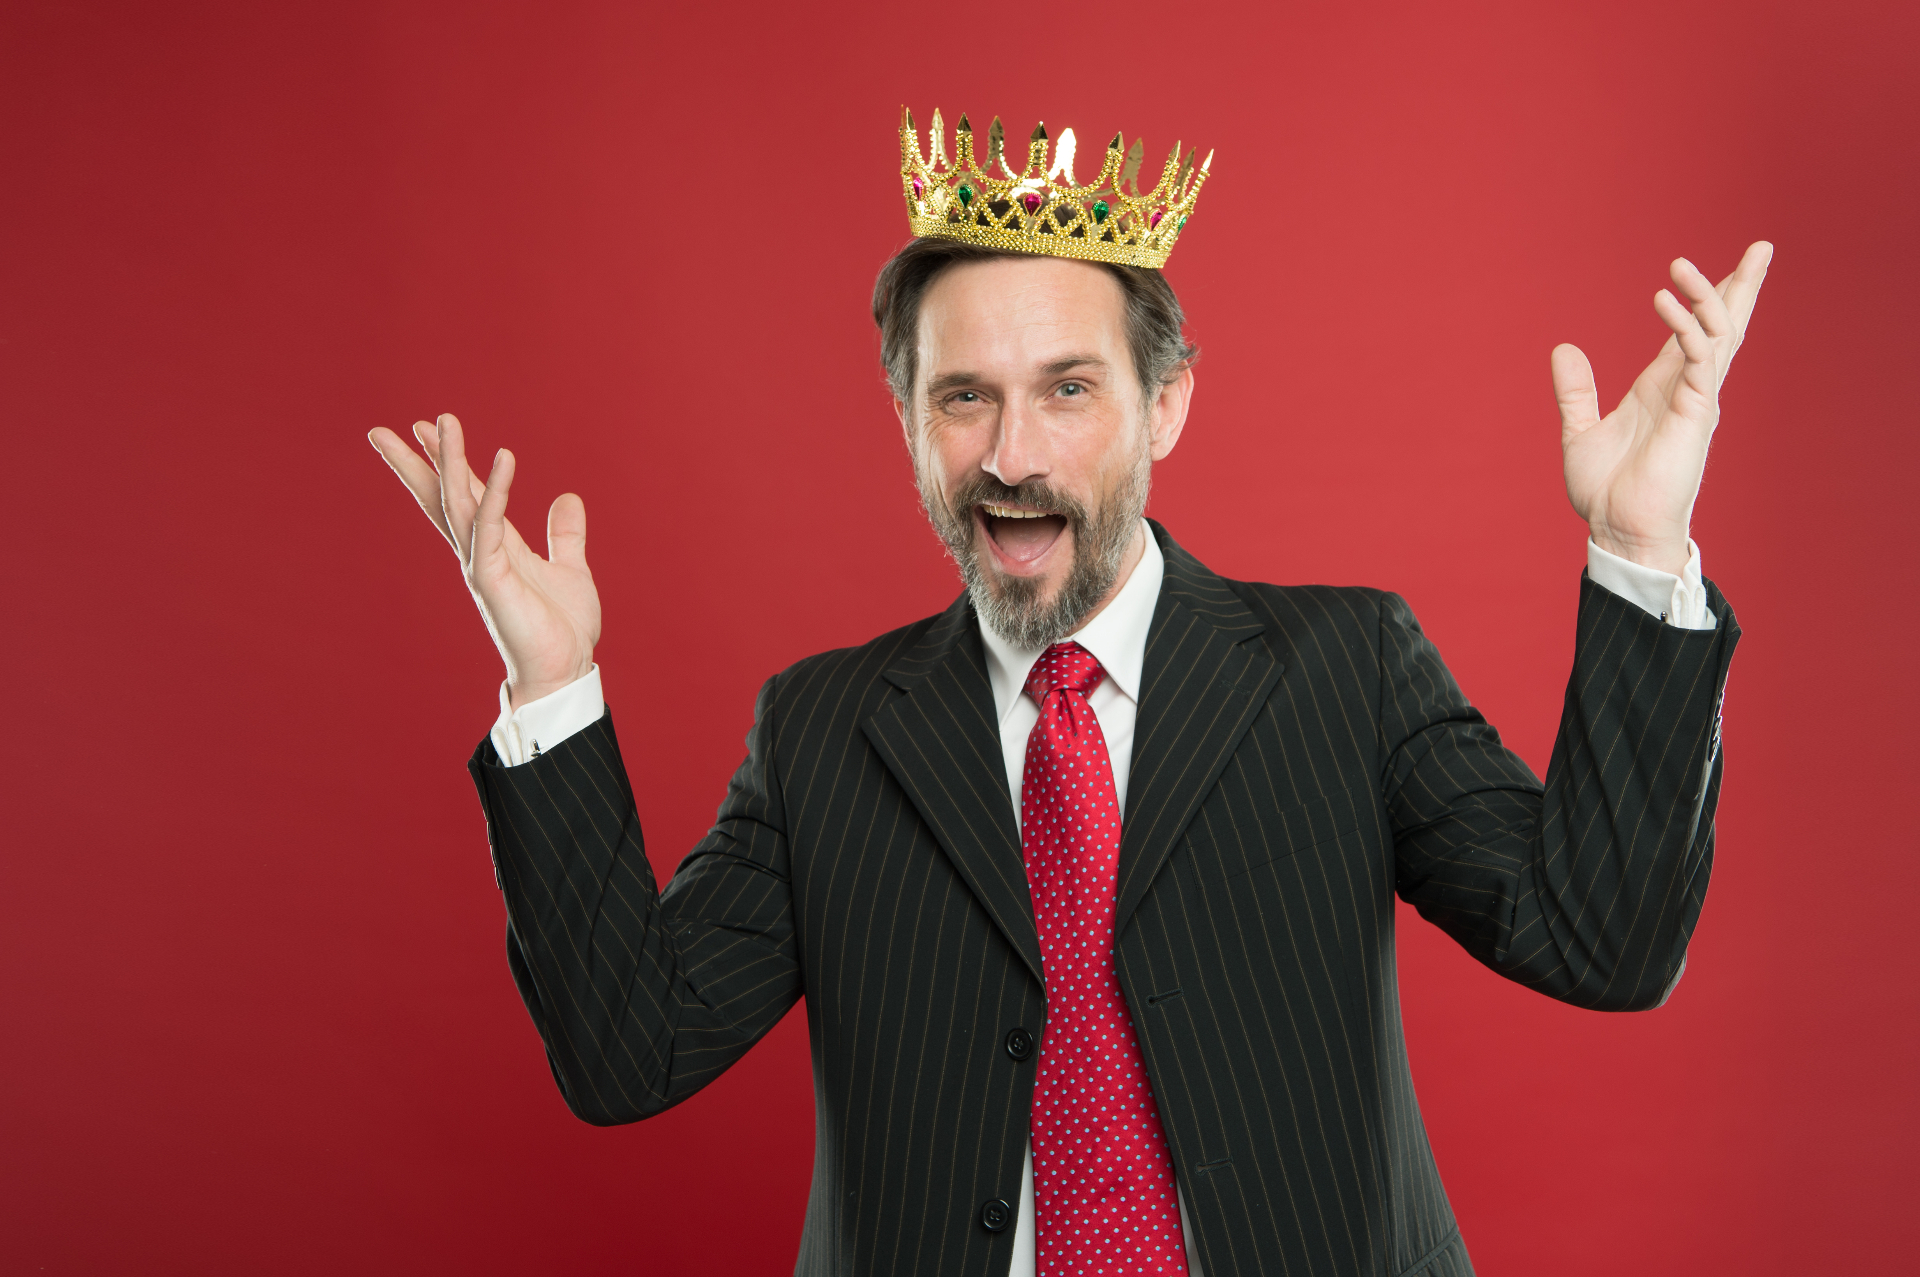 A man in a suit wears a crown with a smug expression. This could represent the ego a narcissism therapist in Palm Beach, FL can help keep in check. Learn more about online therapy in Florida by searching “treatment for narcissism in Palm Beach, FL” today.